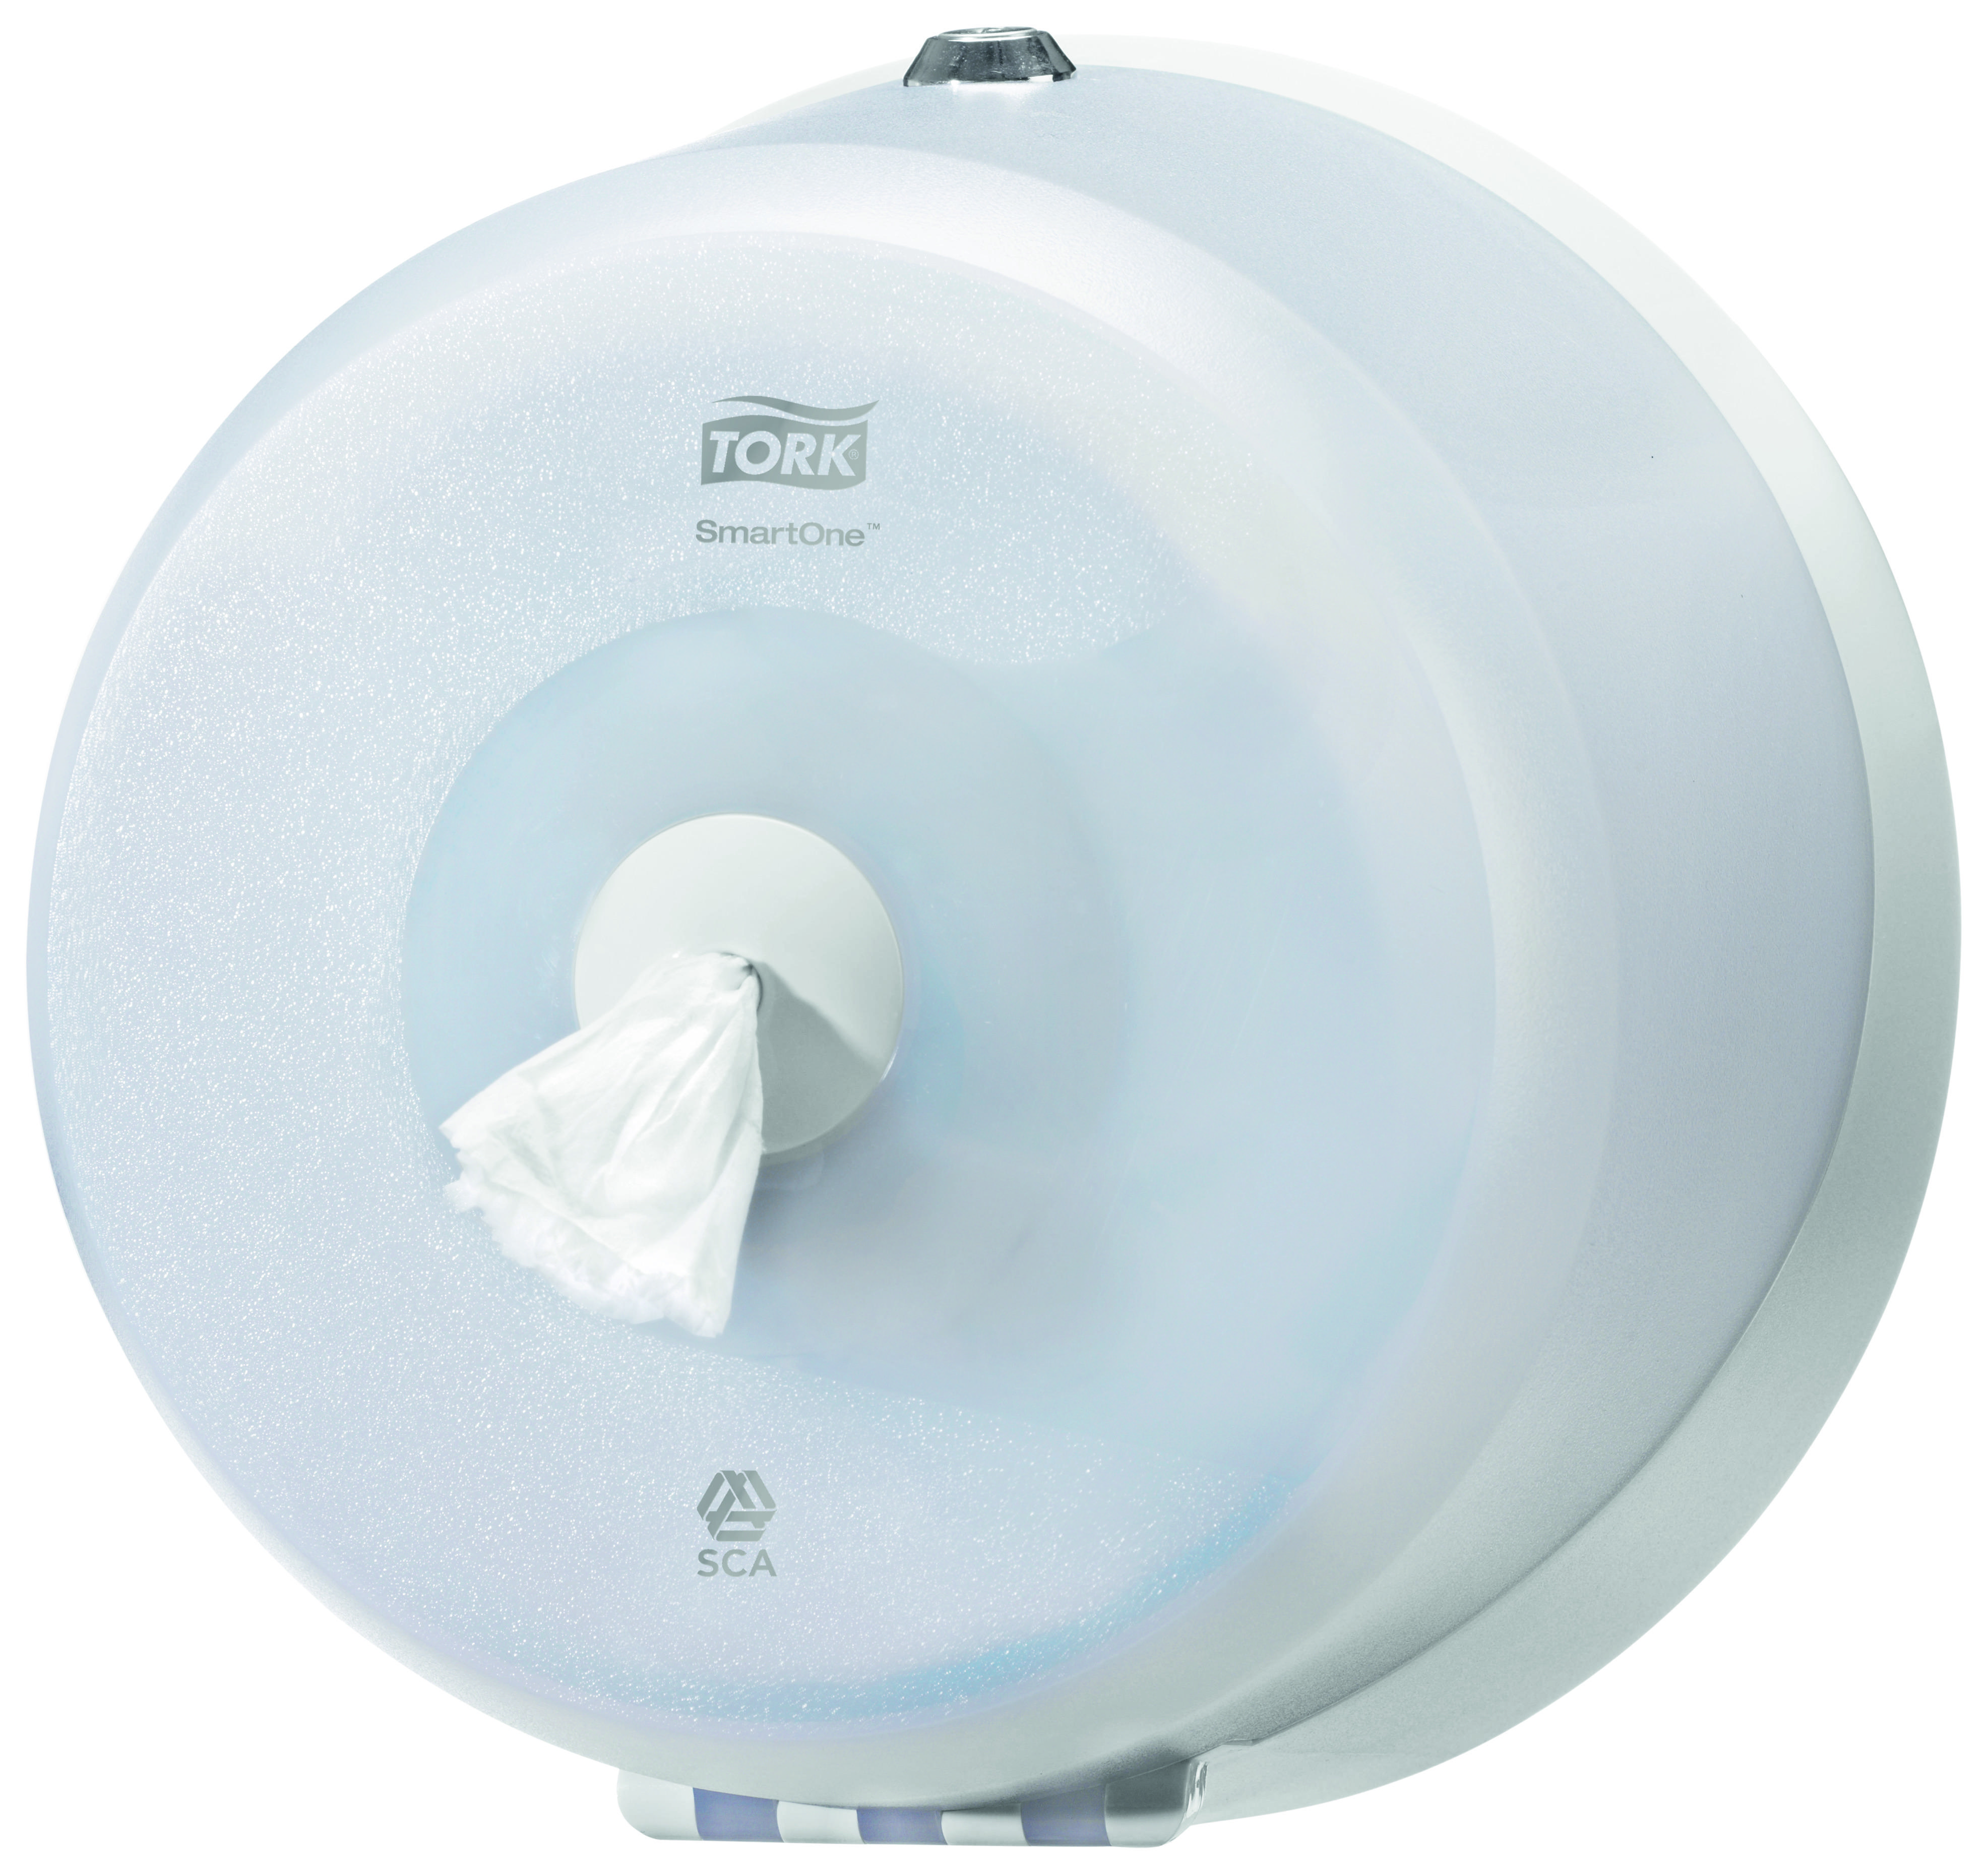 Save up to 40% on your toliet paper consumption with the Tork SmartOne Dispensers!